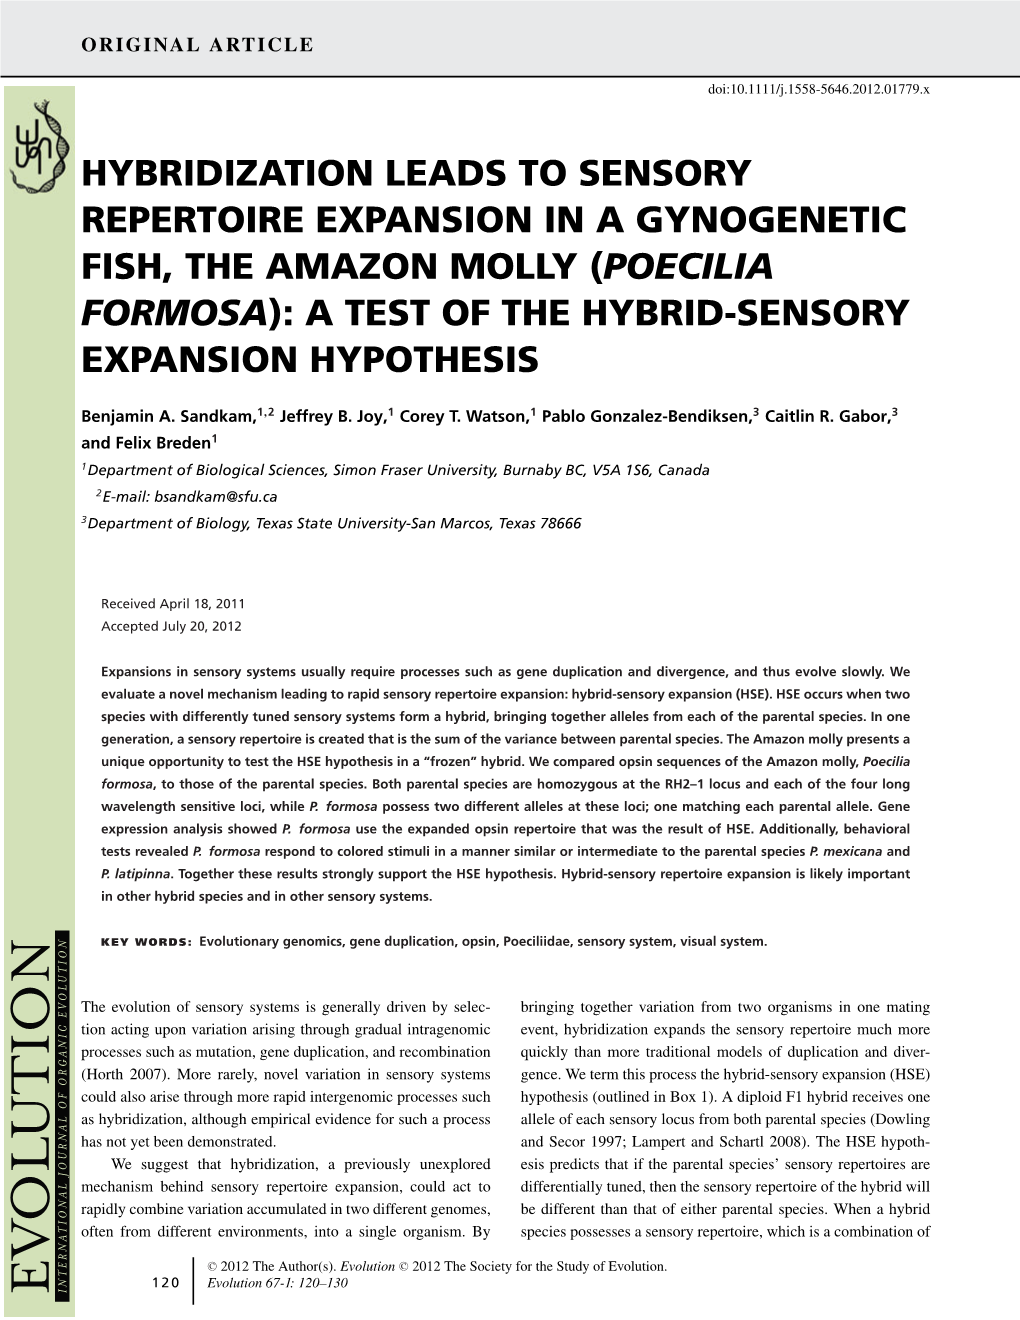 Poecilia Formosa): a Test of the Hybrid-Sensory Expansion Hypothesis